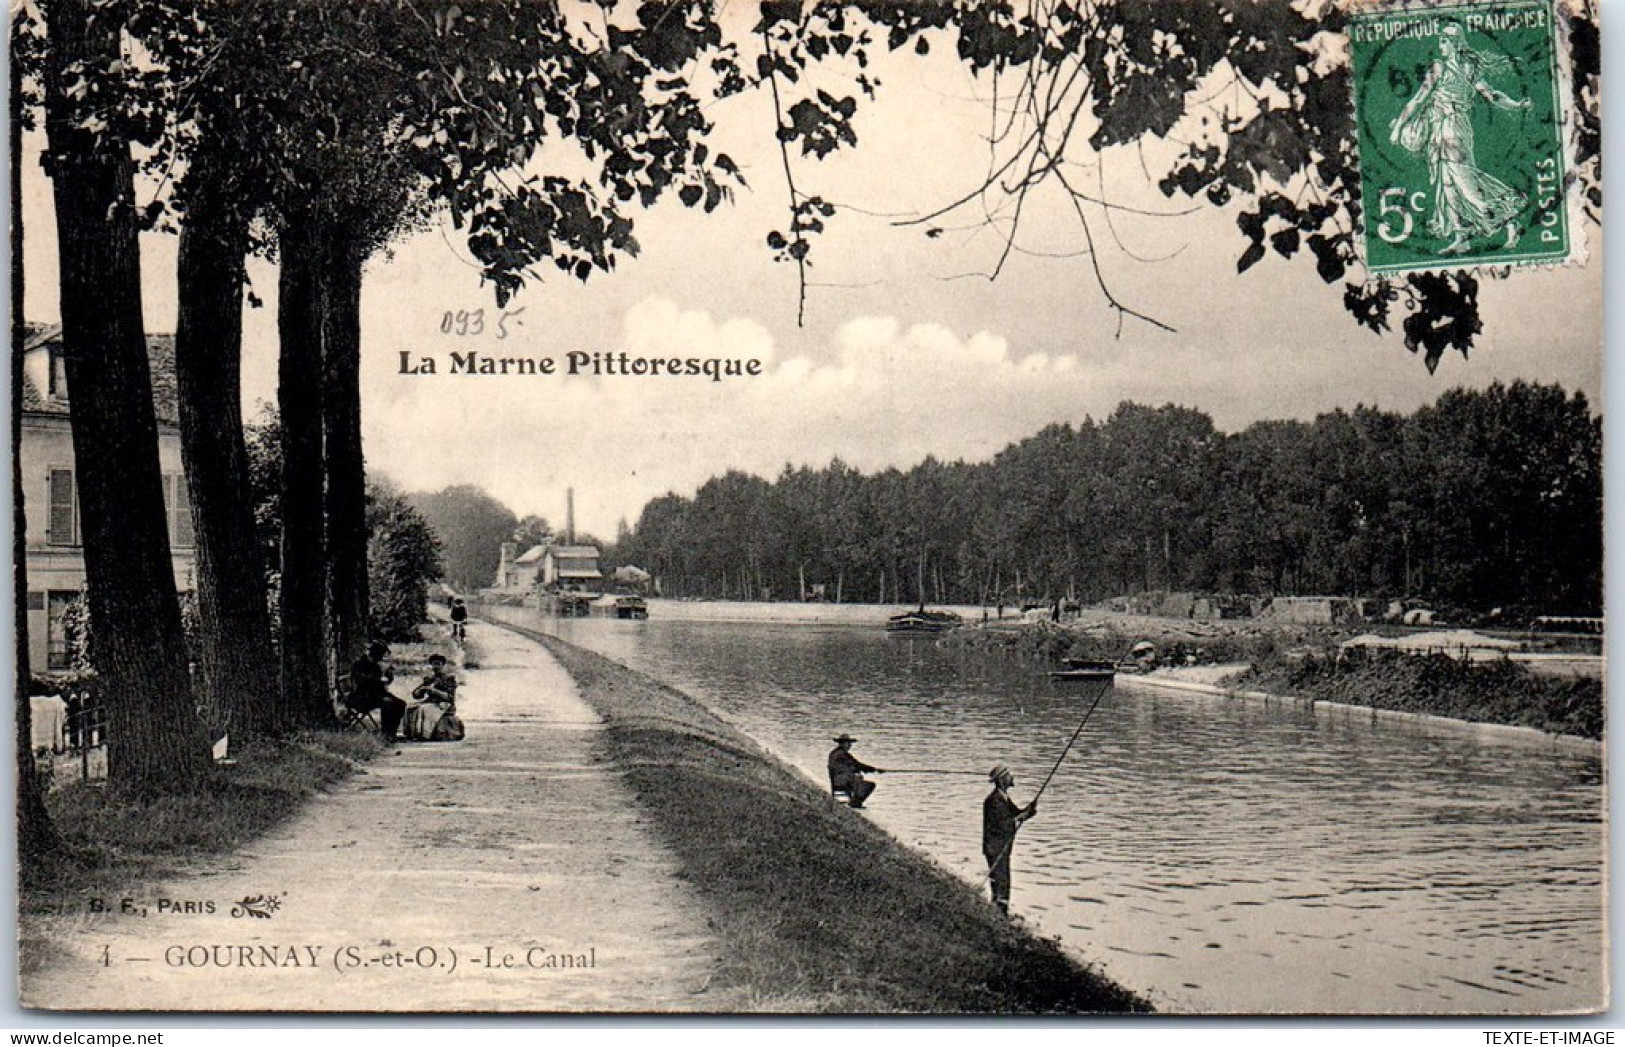 93 GOURNAY SUR MARNE - Le Canal. - Gournay Sur Marne